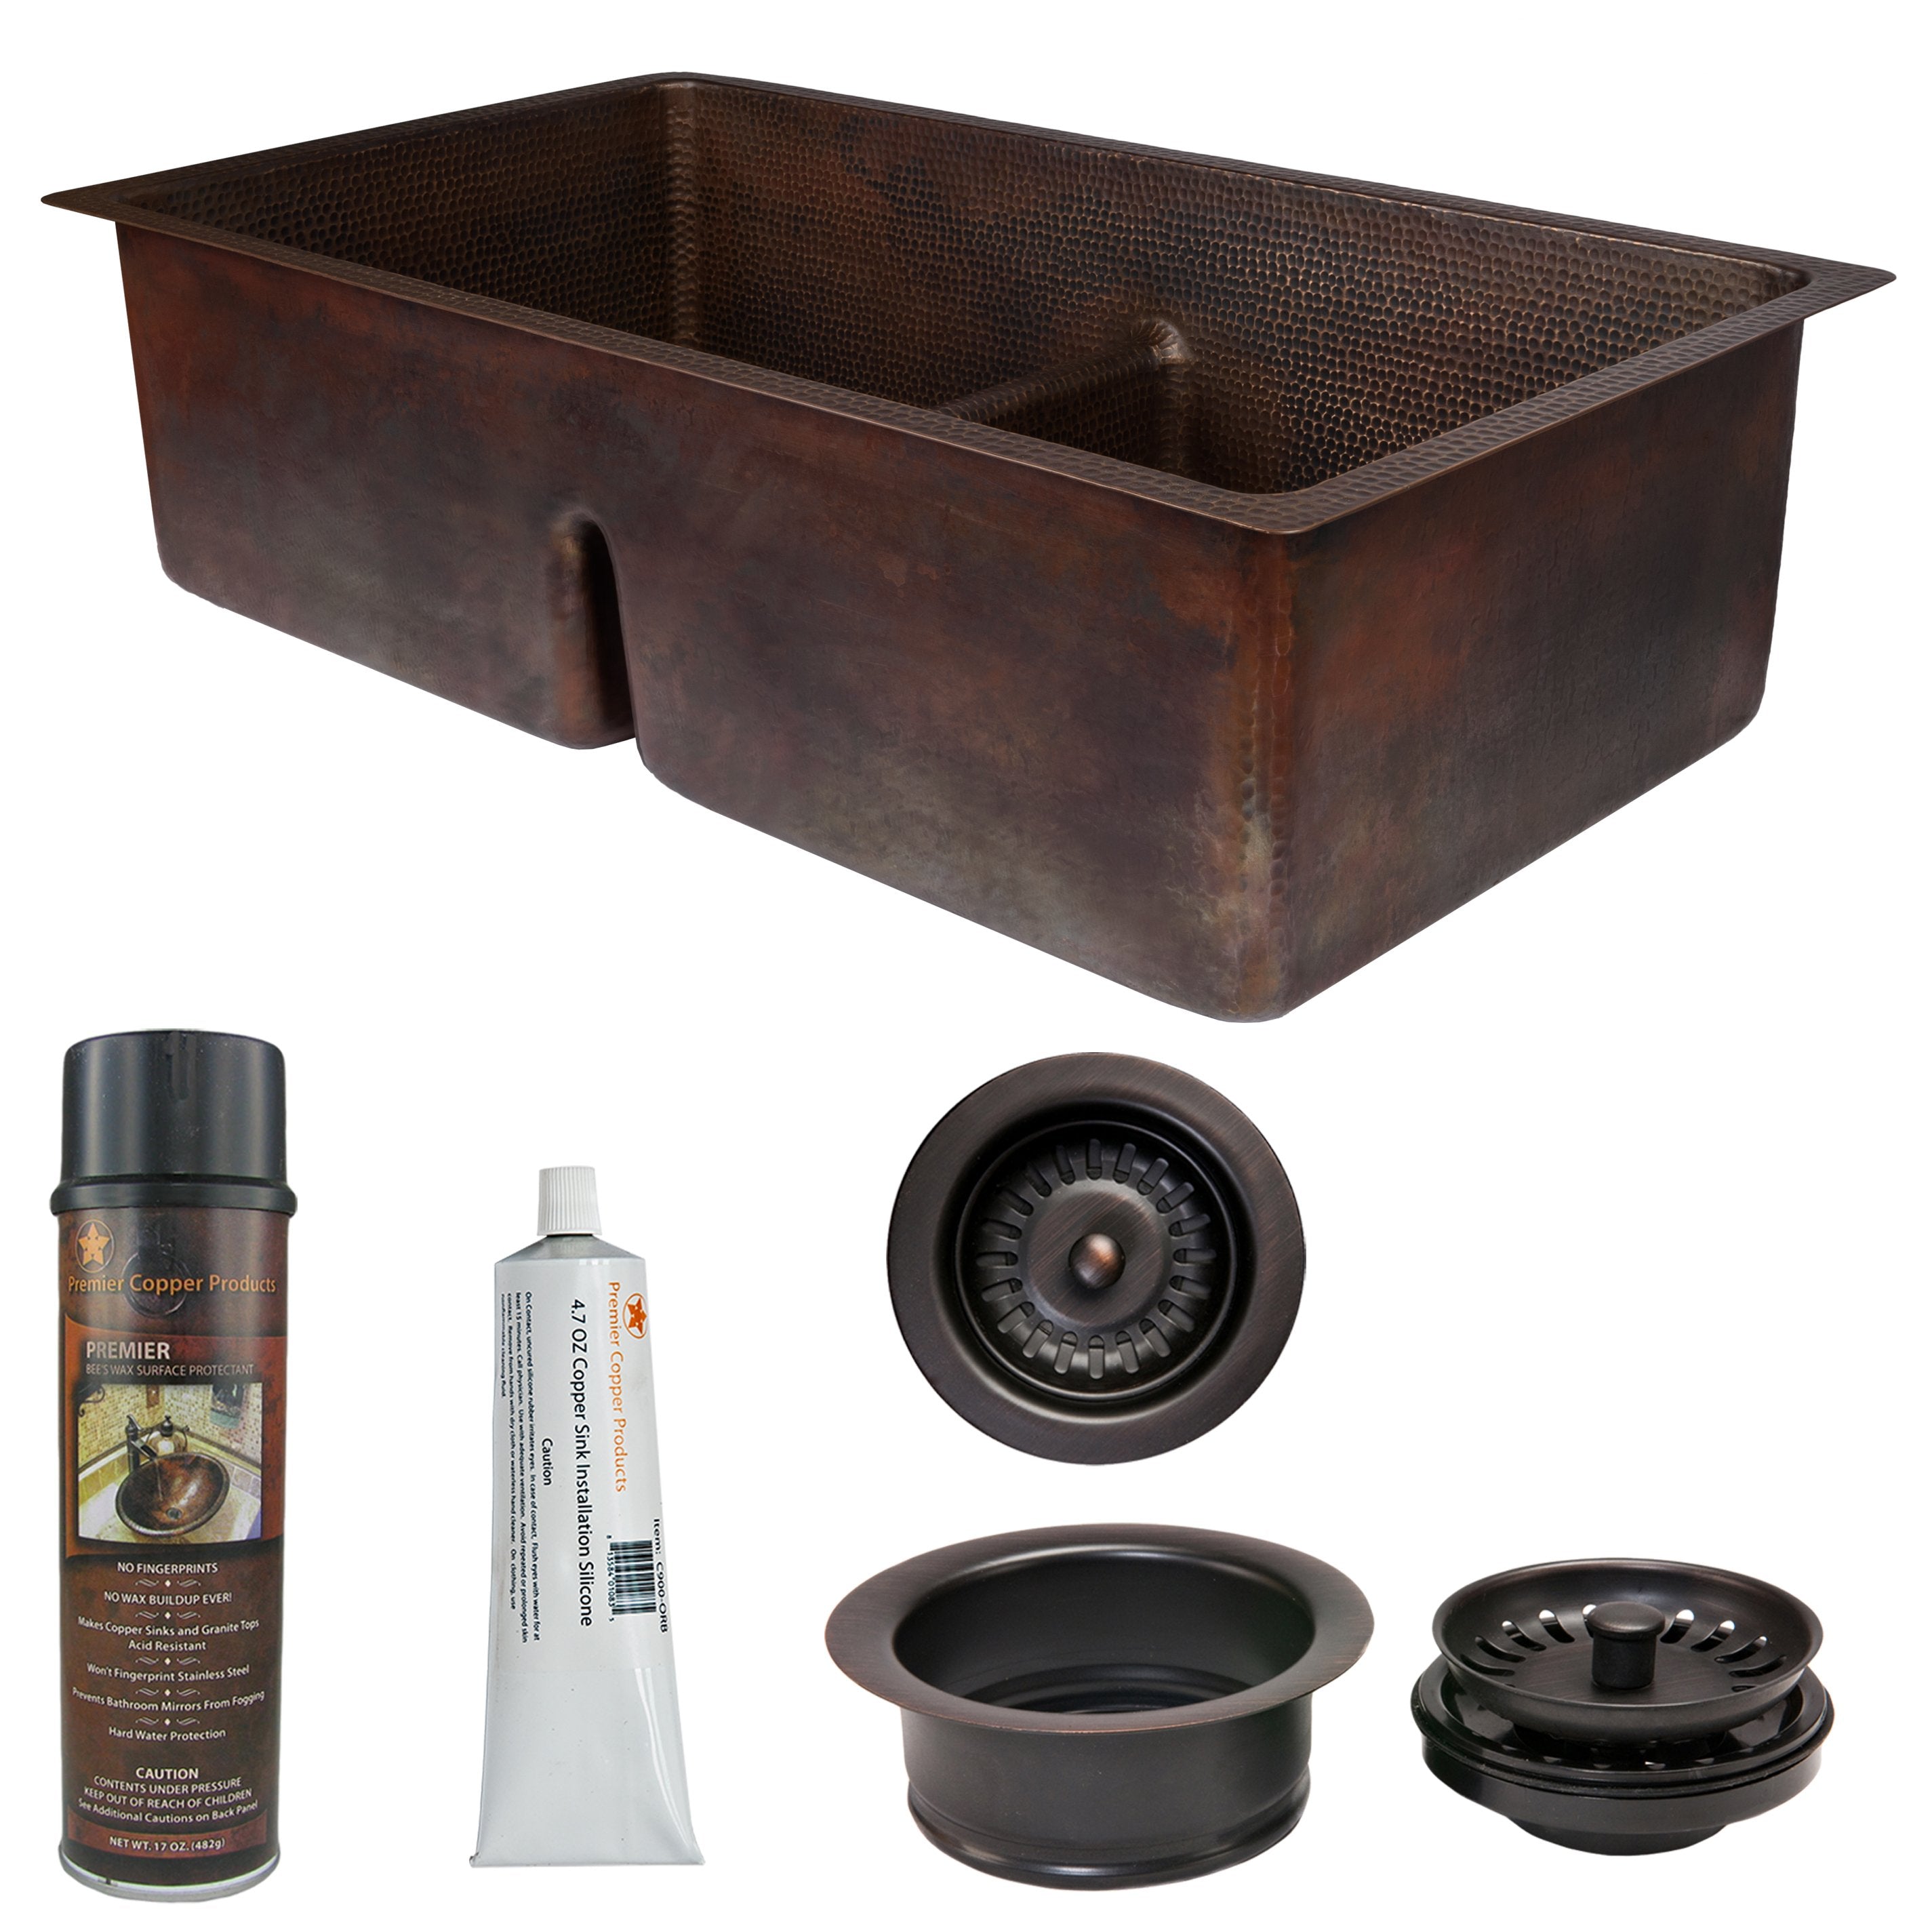 Premier Copper Products - KSP3_K50DB33199-SD5 Kitchen Sink and Drain Package-DirectSinks